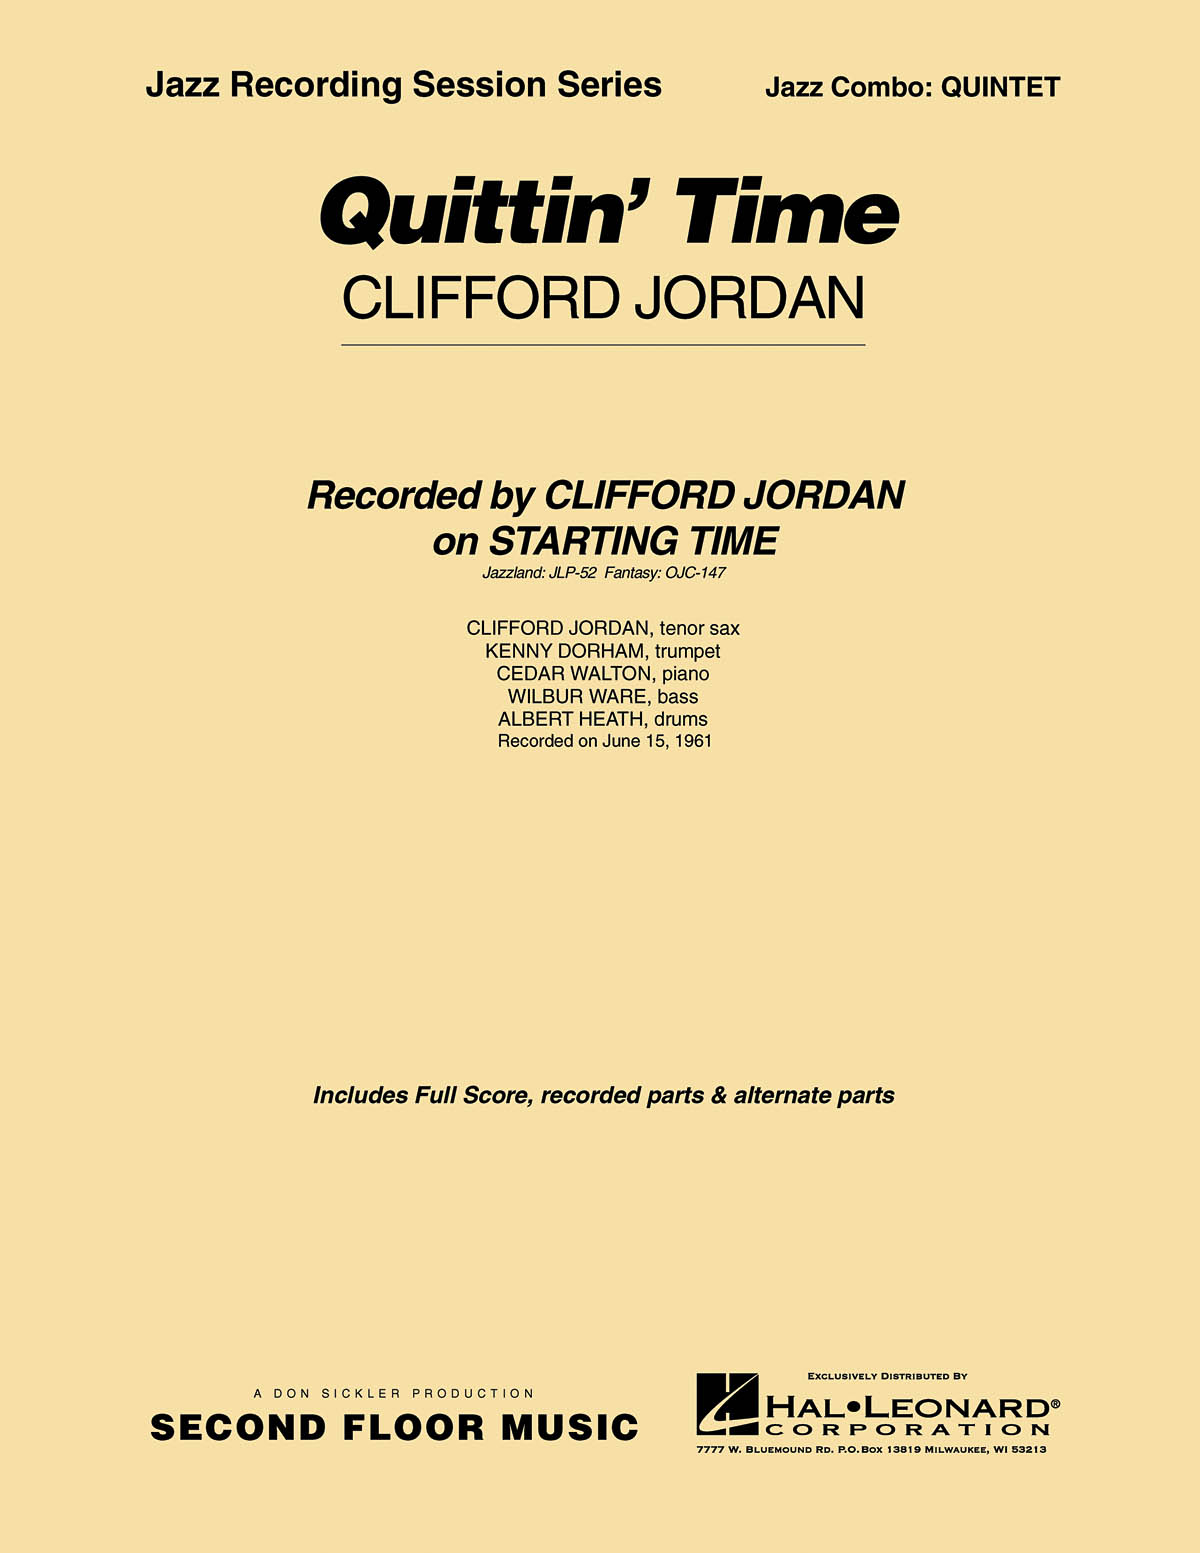 Quittin’ Time